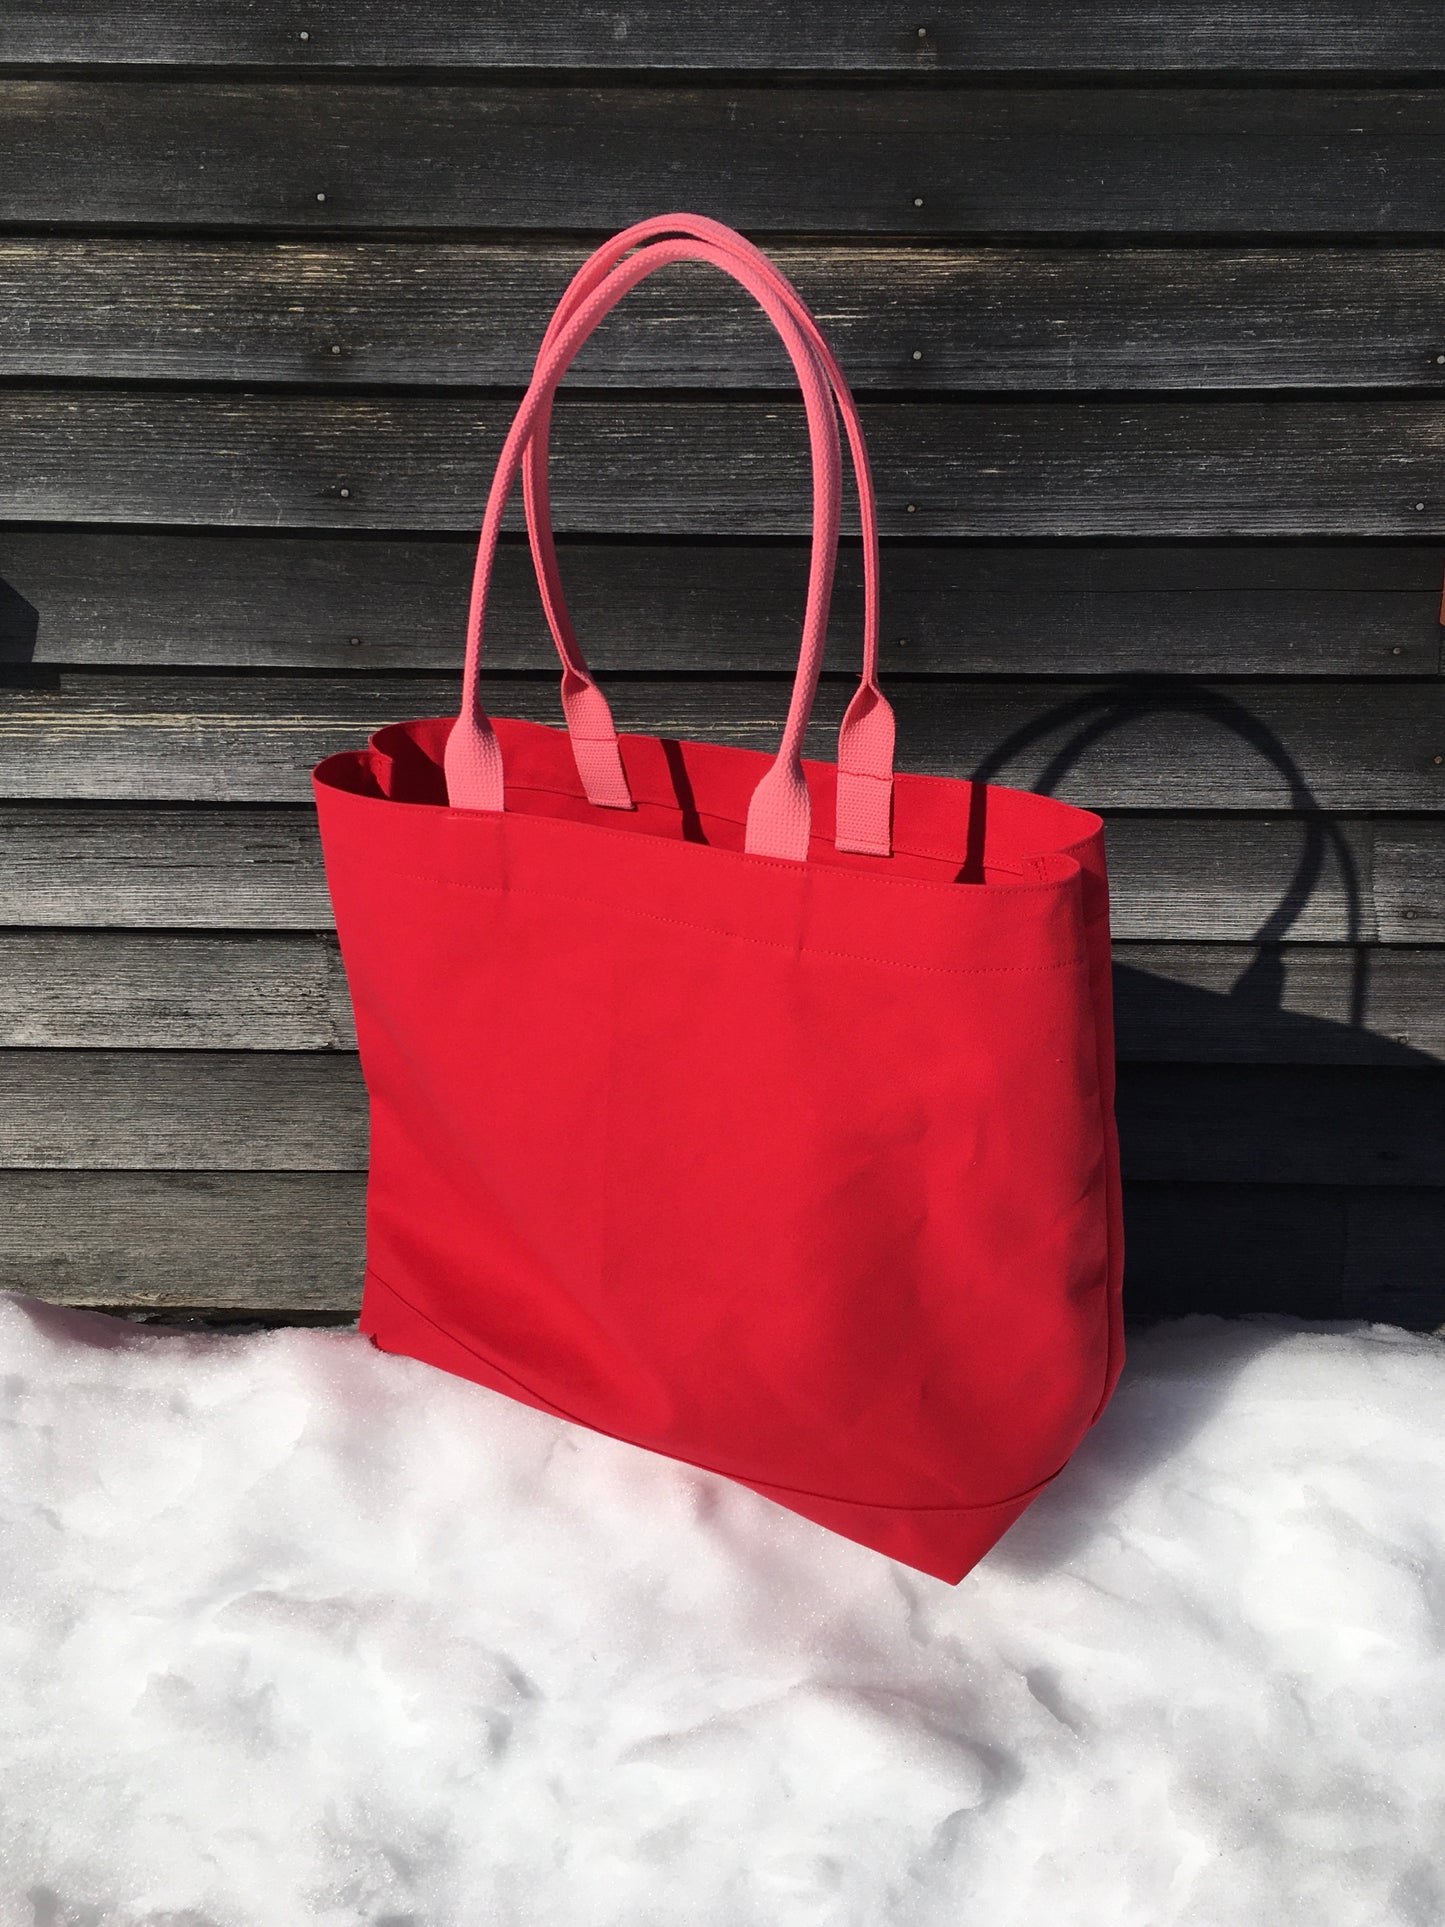 BIG RED TOTE - Red/pink